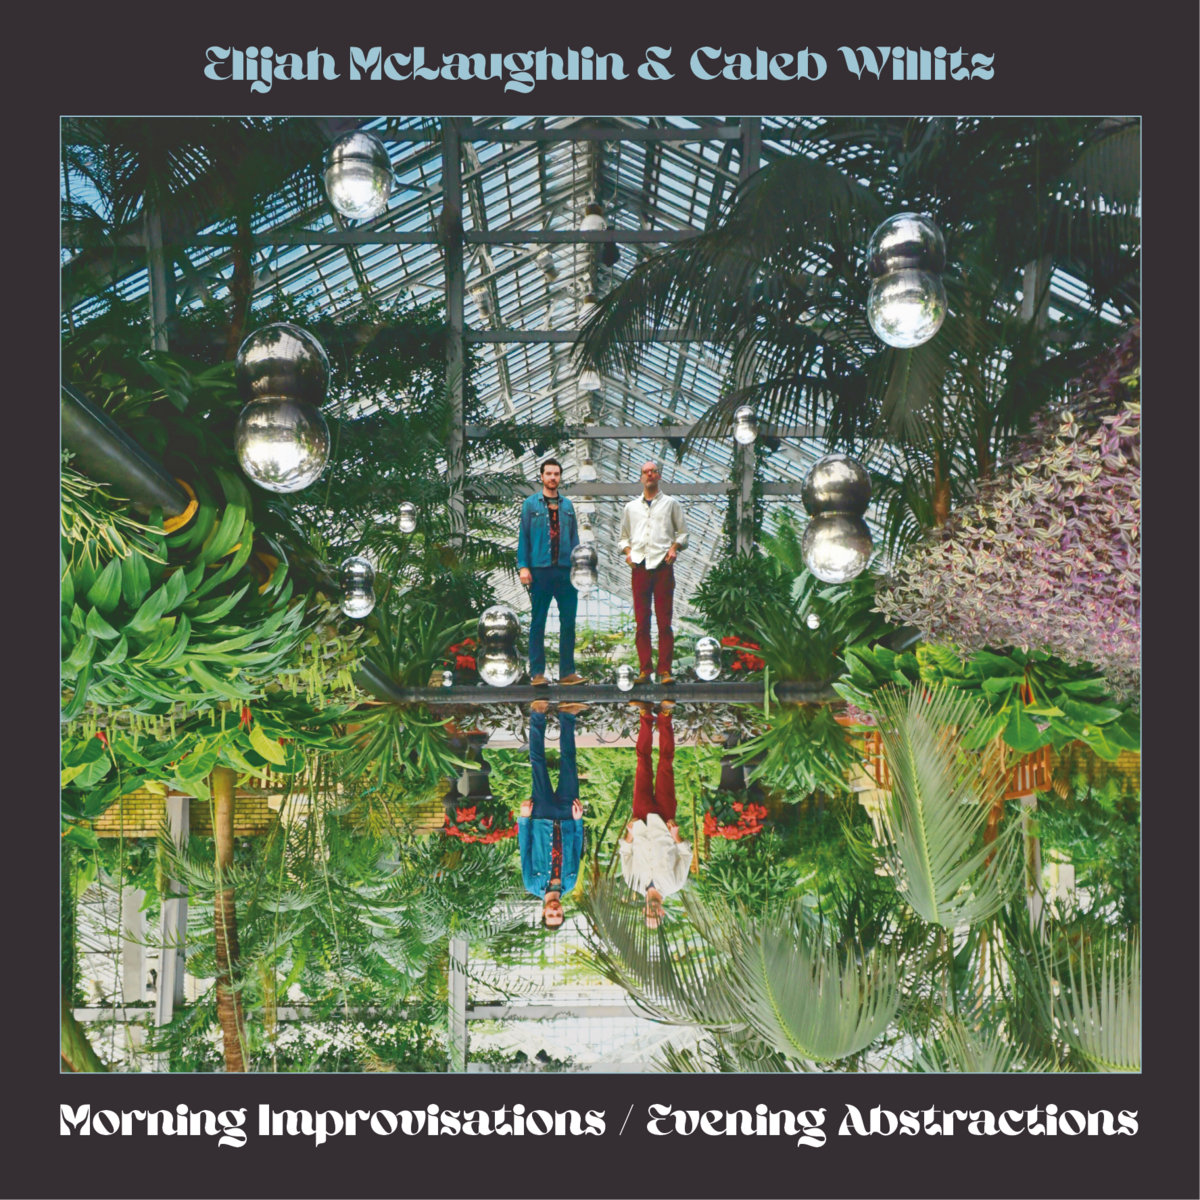 Album Review: Morning Improvisations / Evening Abstractions by Elijah McLaughlin & Caleb Willitz